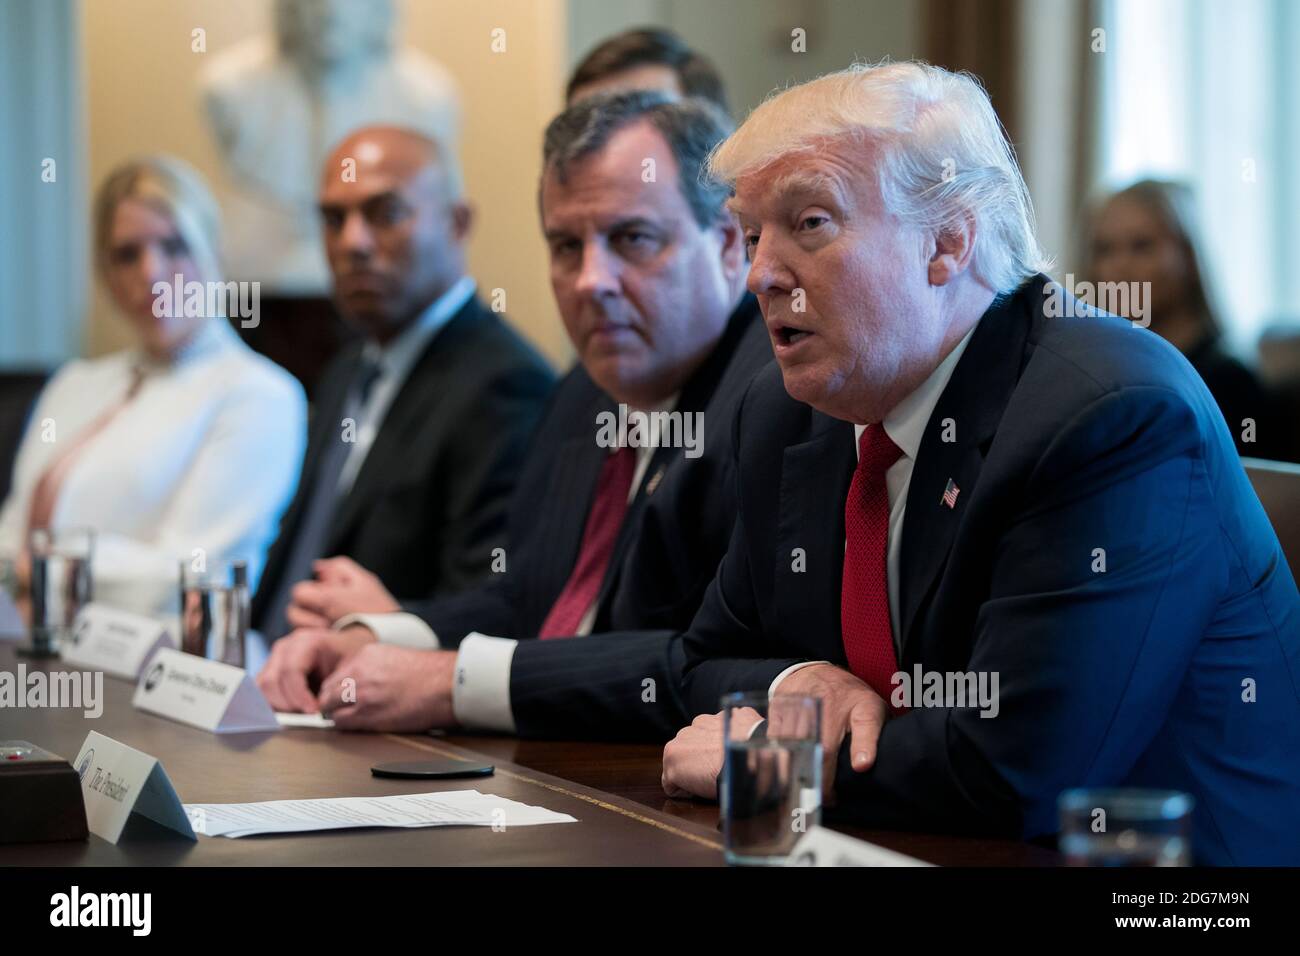 US President Donald J. Trump (R), with New Jersey Governor Chris Christie  (2-R), Former New York Yankee great Mariano Rivera (2-L) and Florida  Attorney General Pam Bondi (L), delivers remarks during an